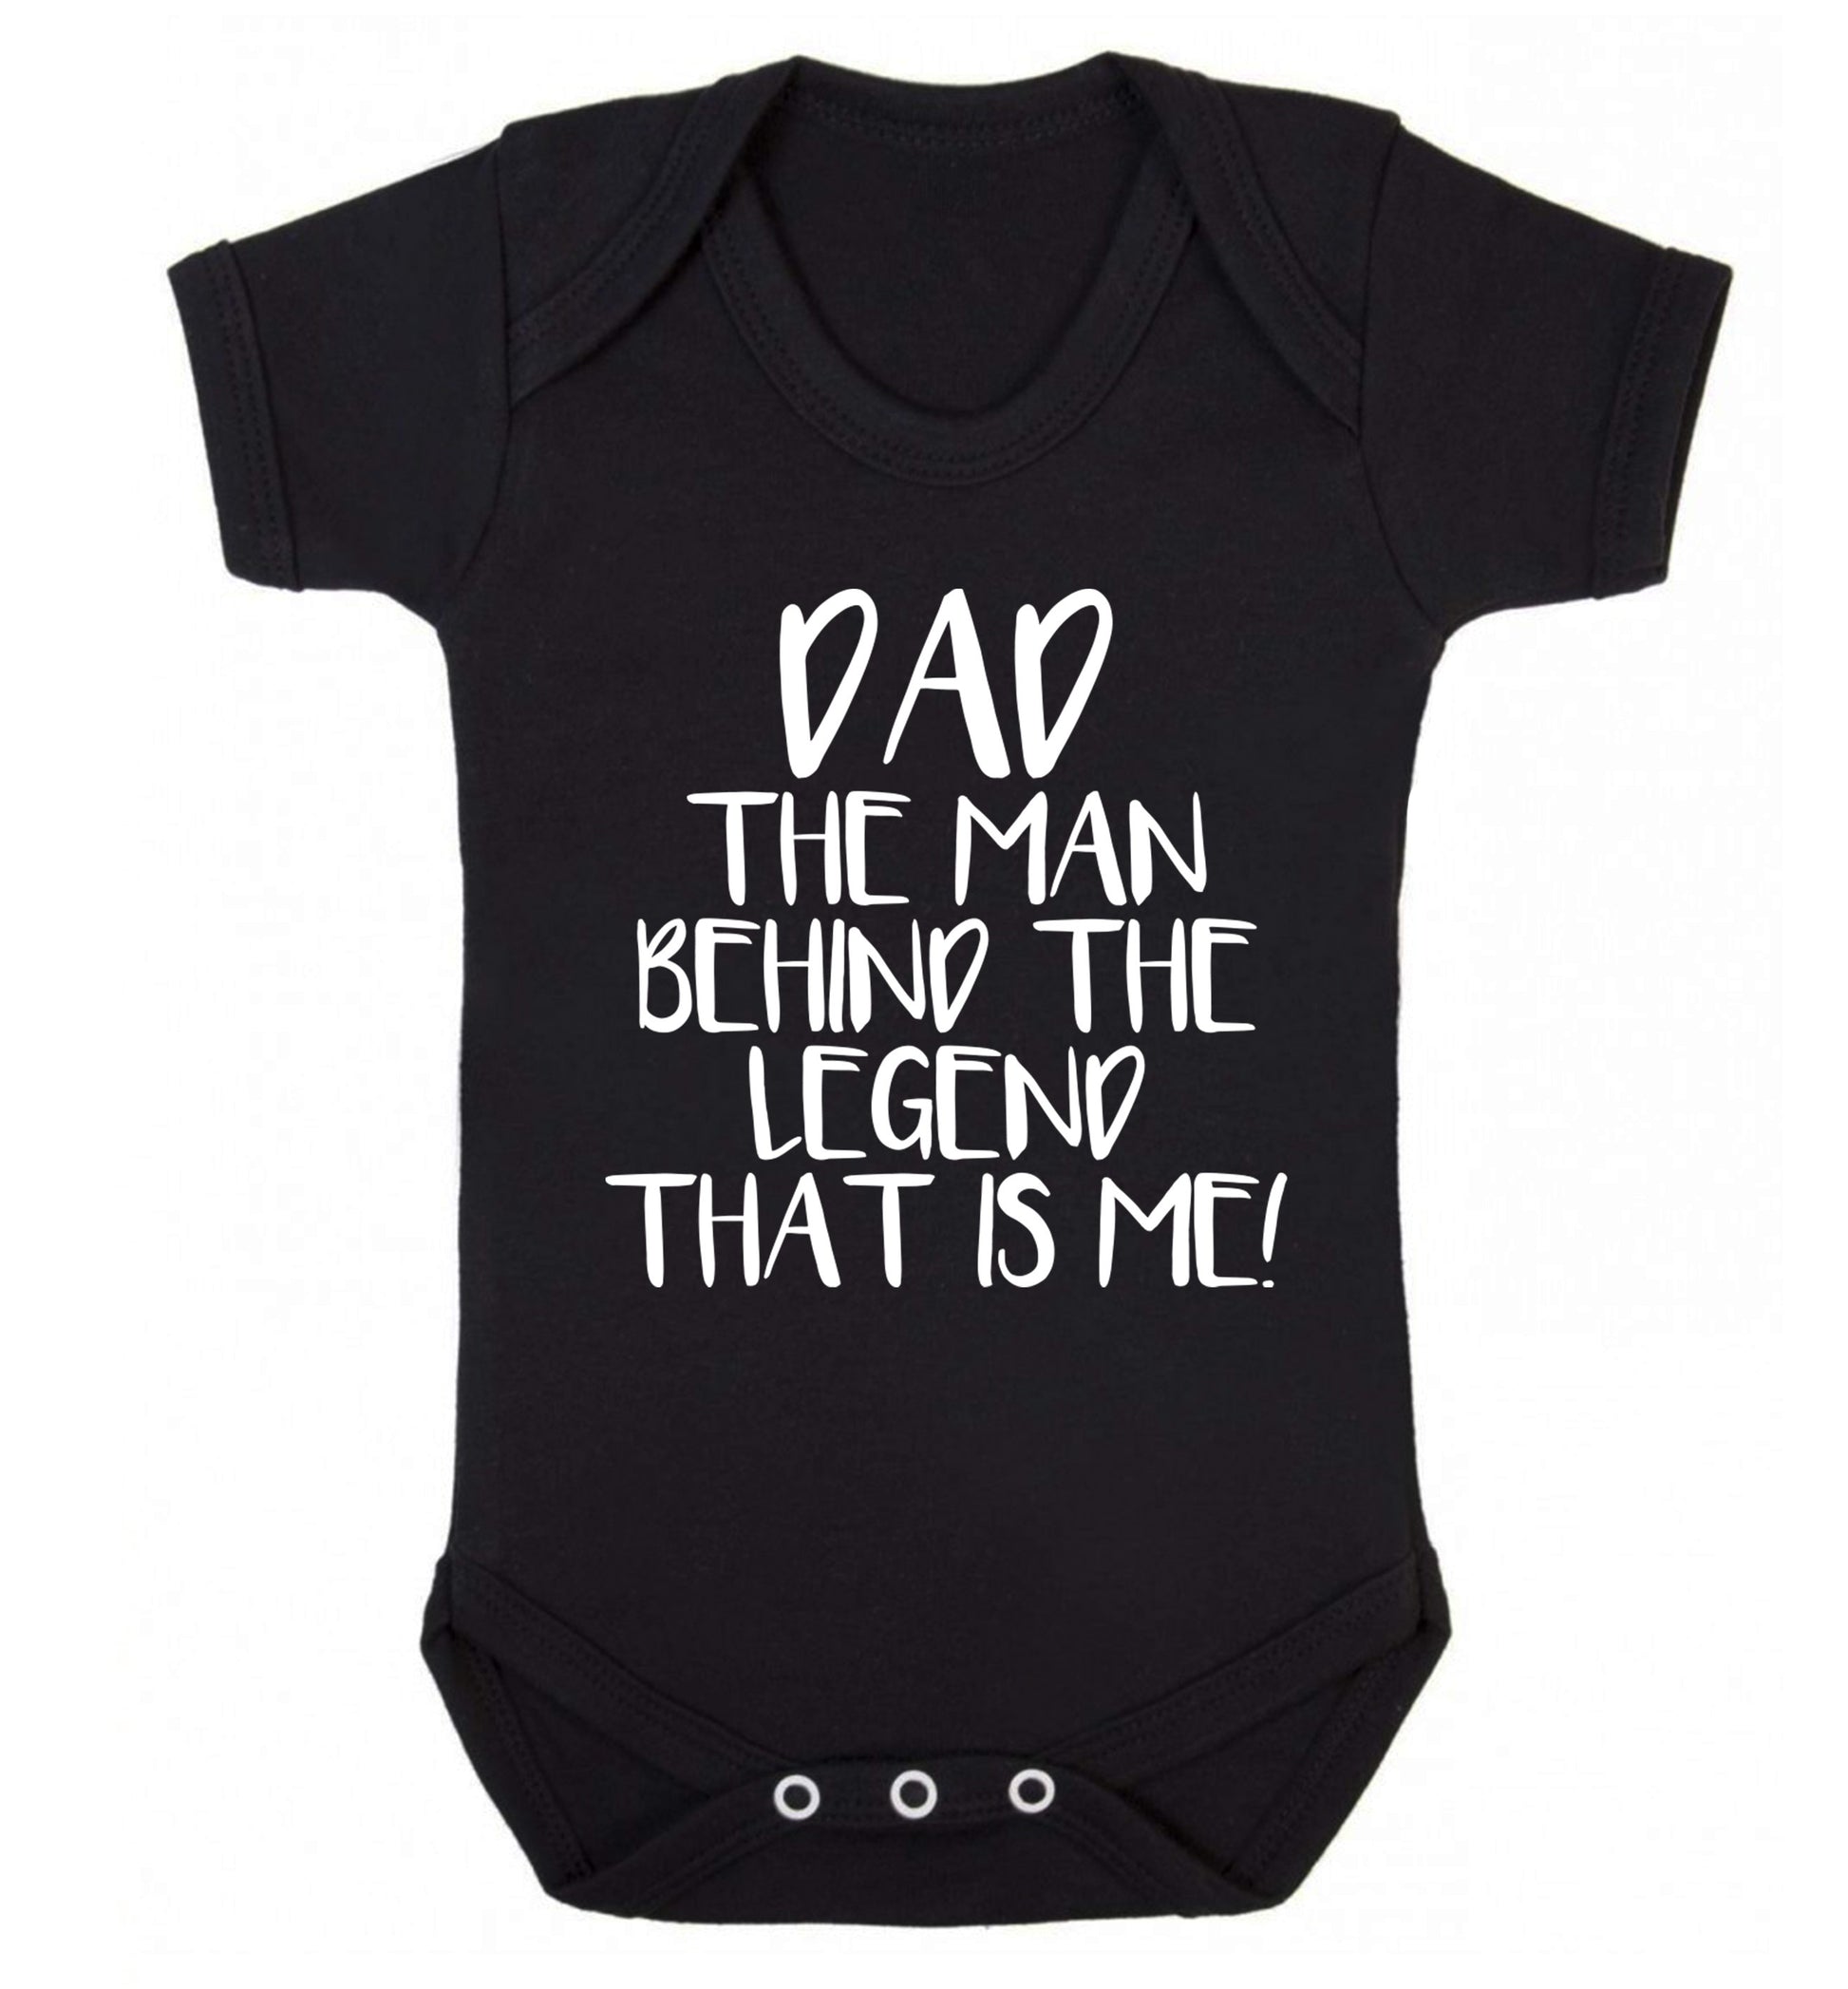 Dad the man behind the legend that is me! Baby Vest black 18-24 months